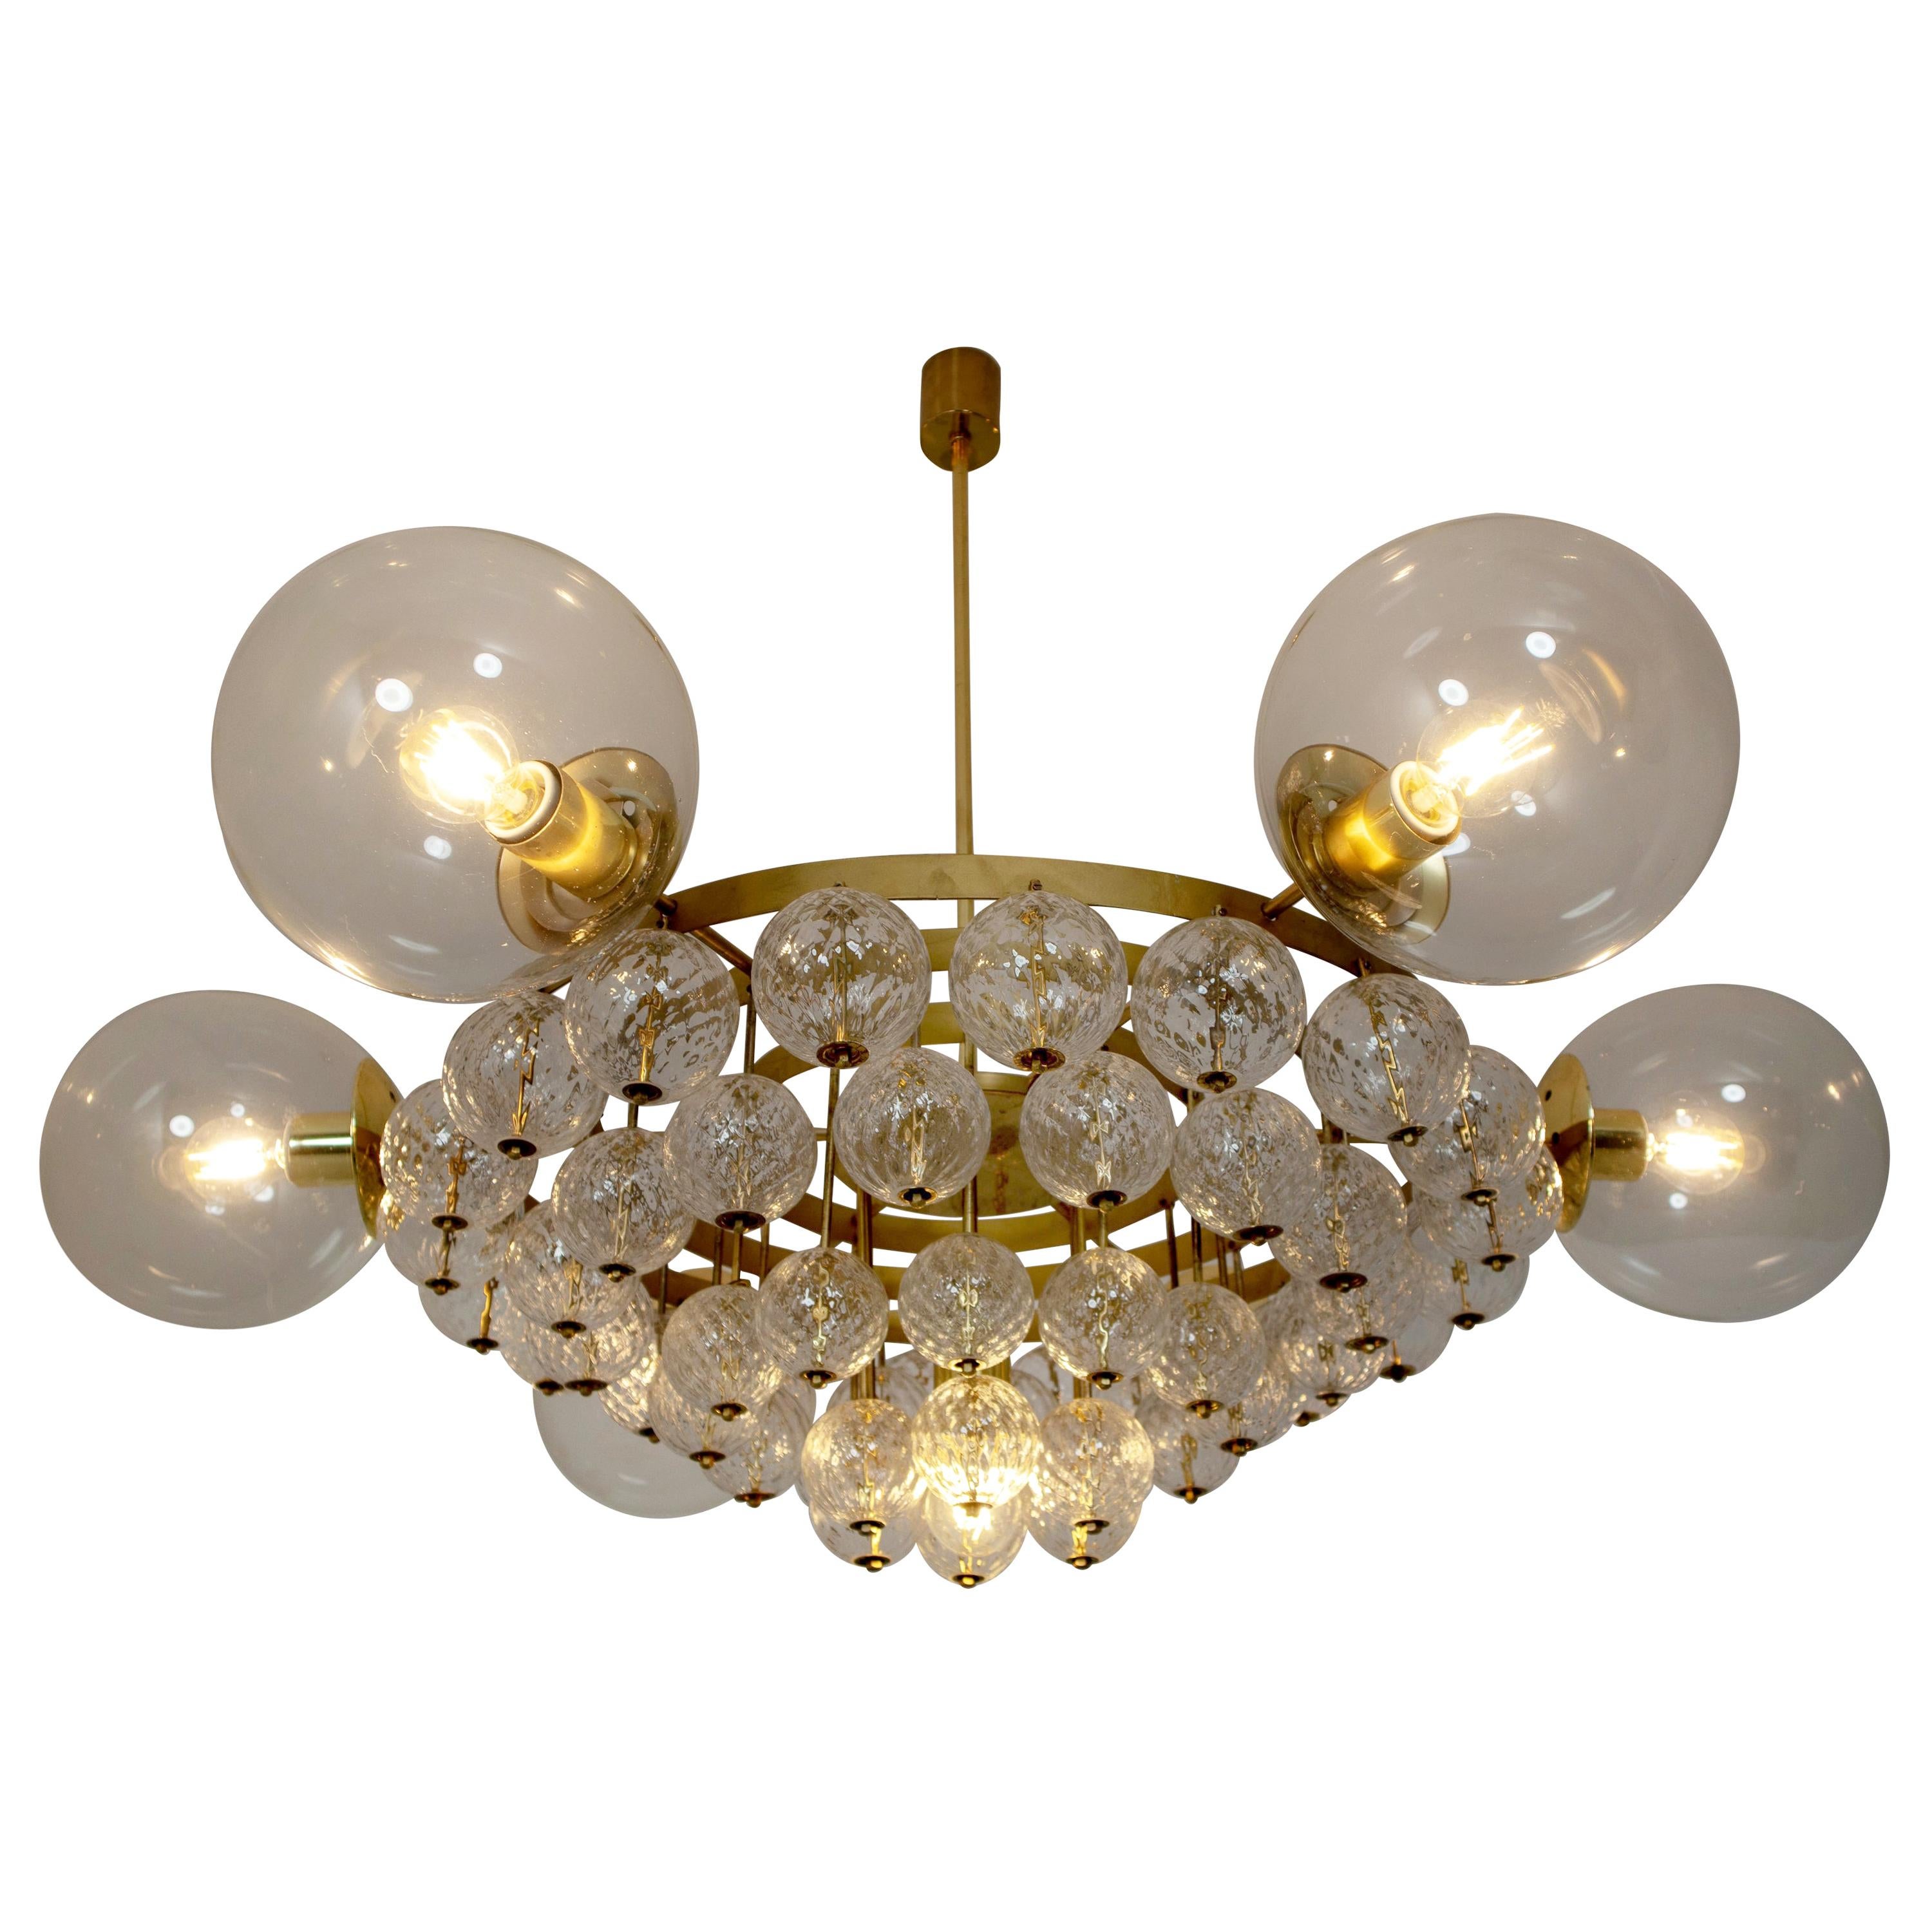 Grand Chandelier with Brass Fixture and Glass Globes